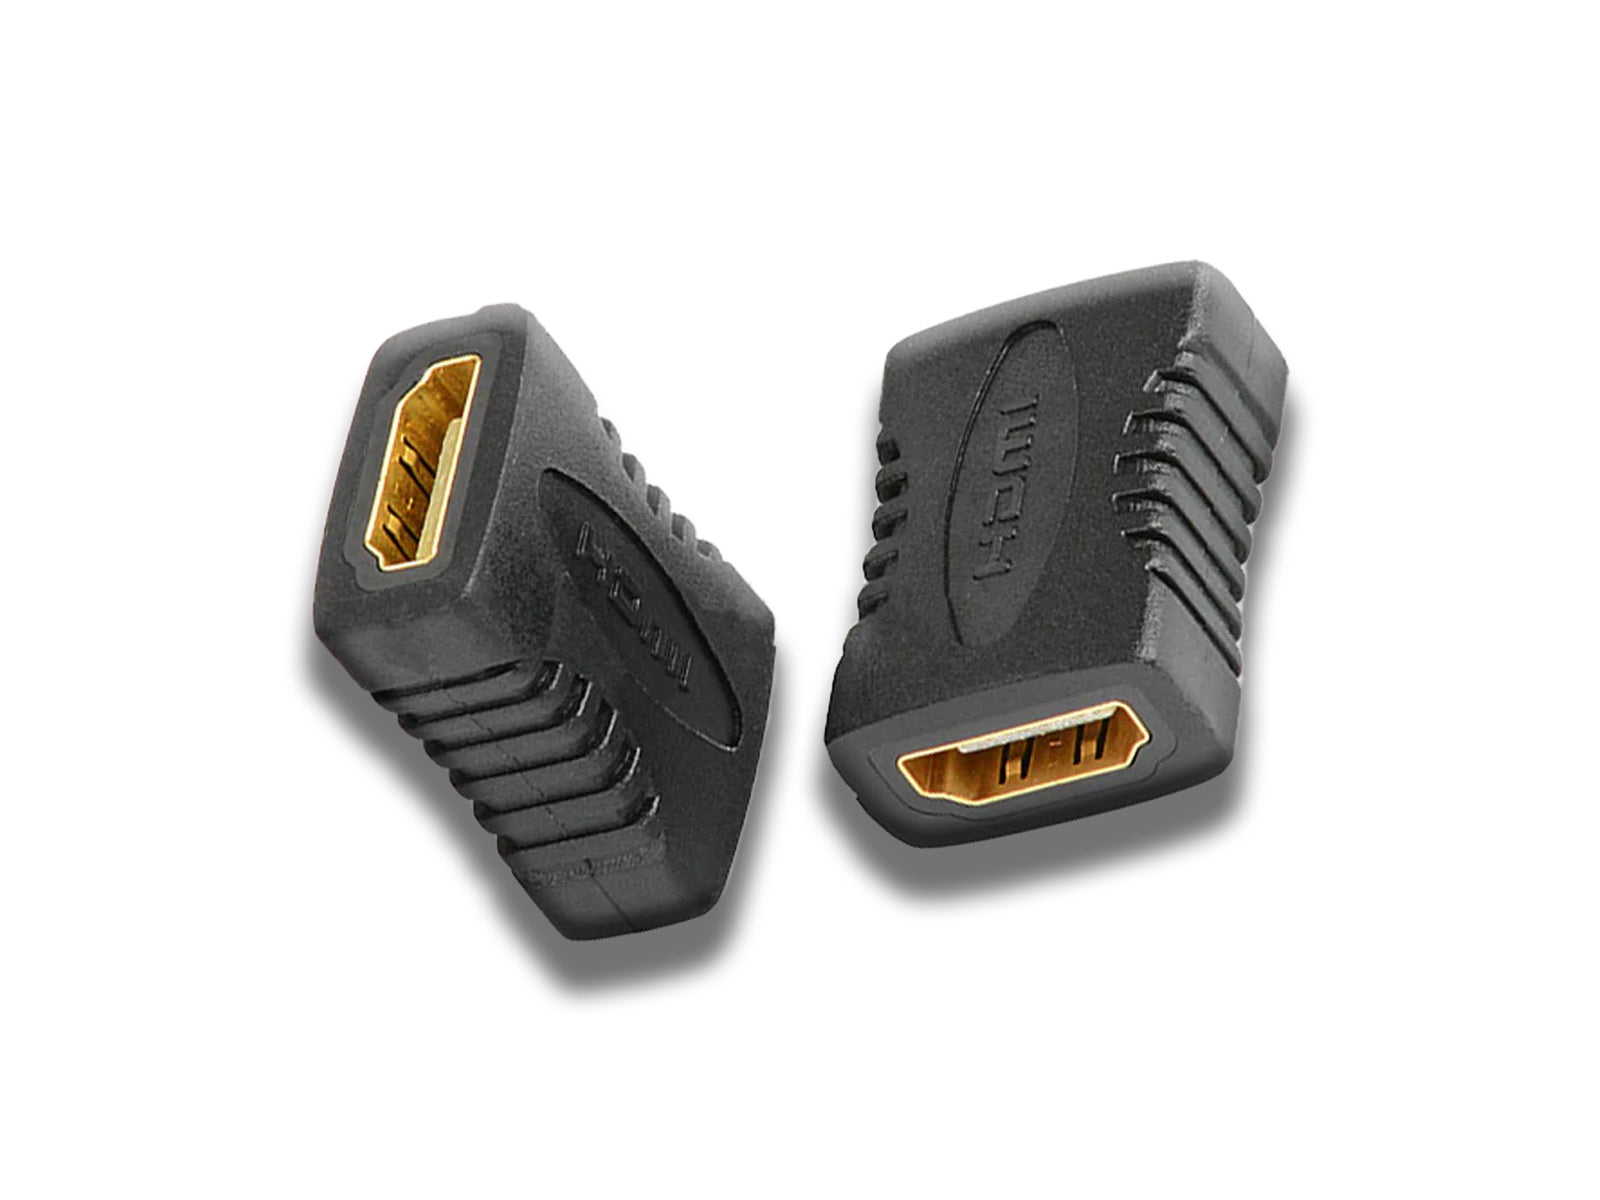 Image-of-the-hdmi-coupler-on-the-white-background